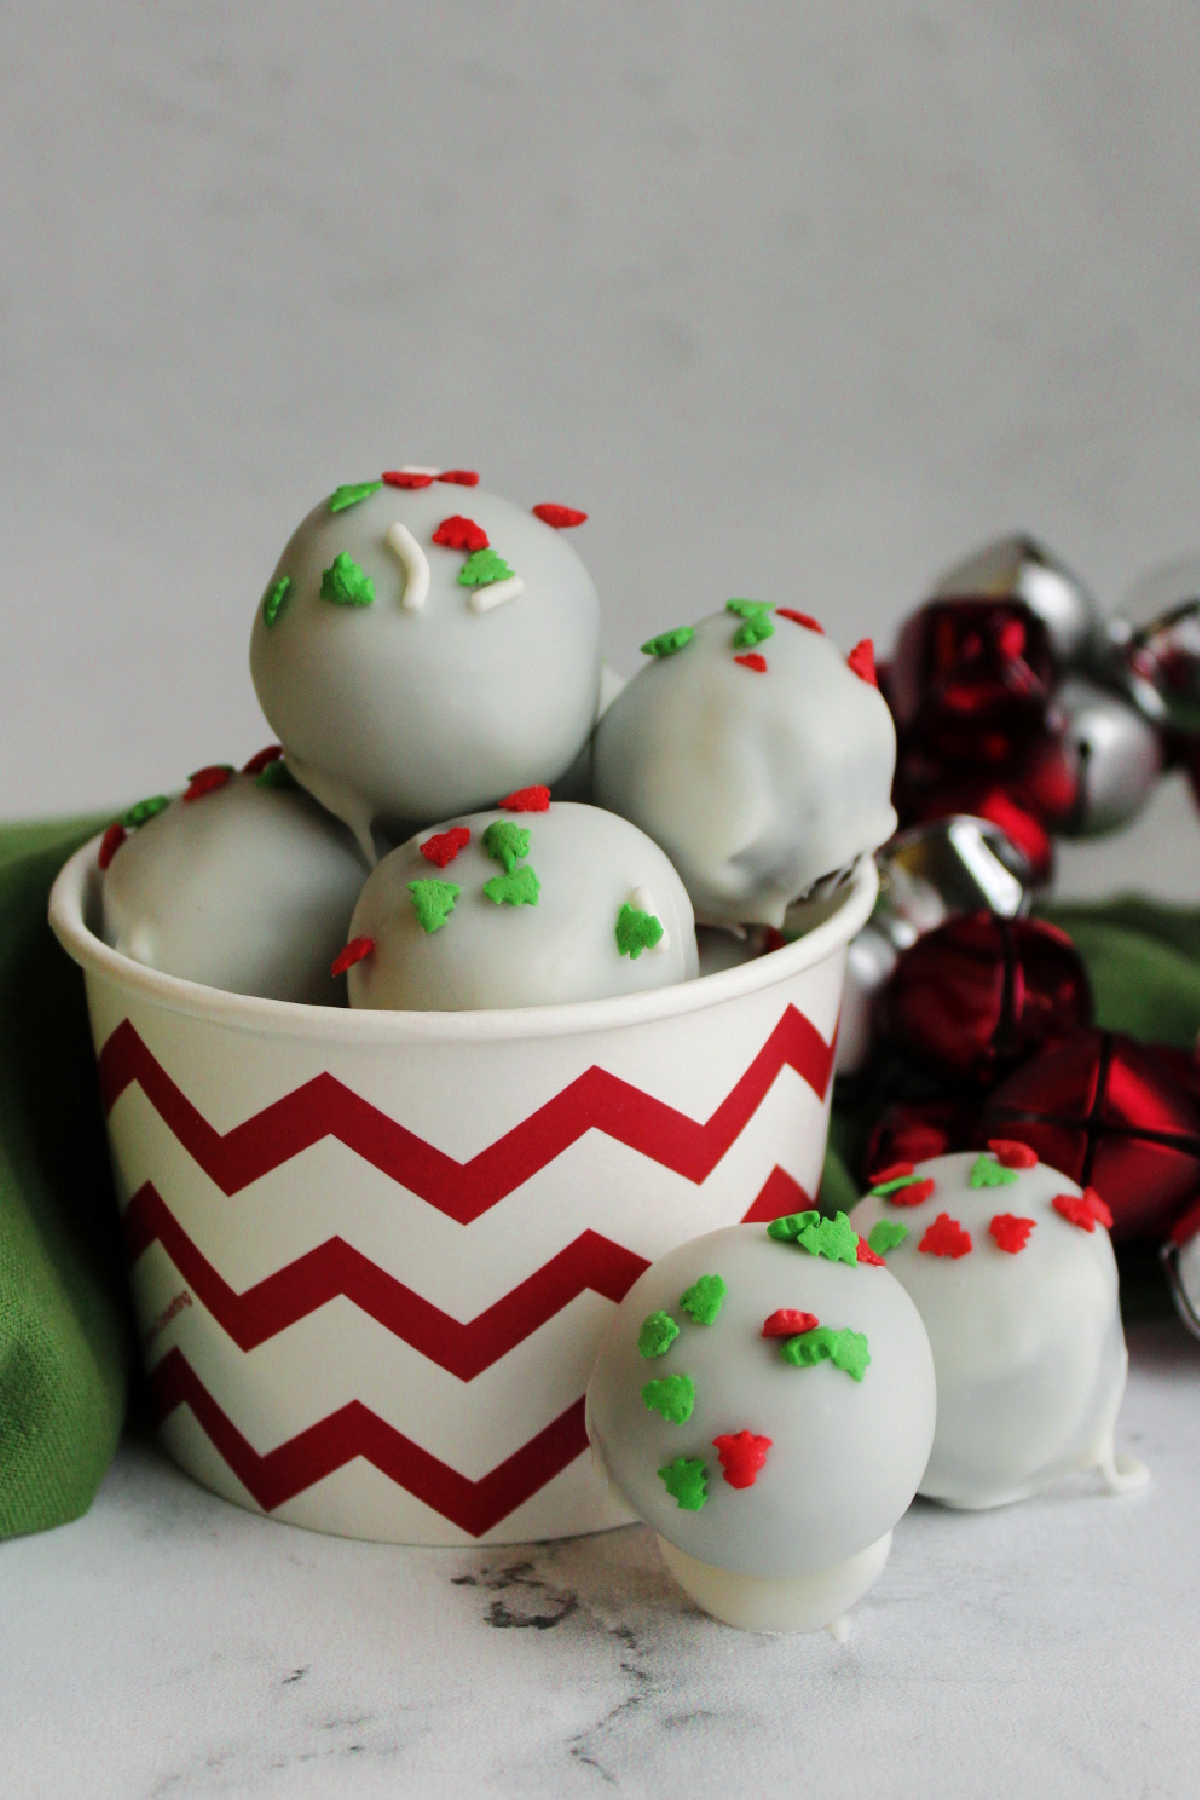 Cup of white chocolate coated oreo balls topped with festive Christmas sprinkles.